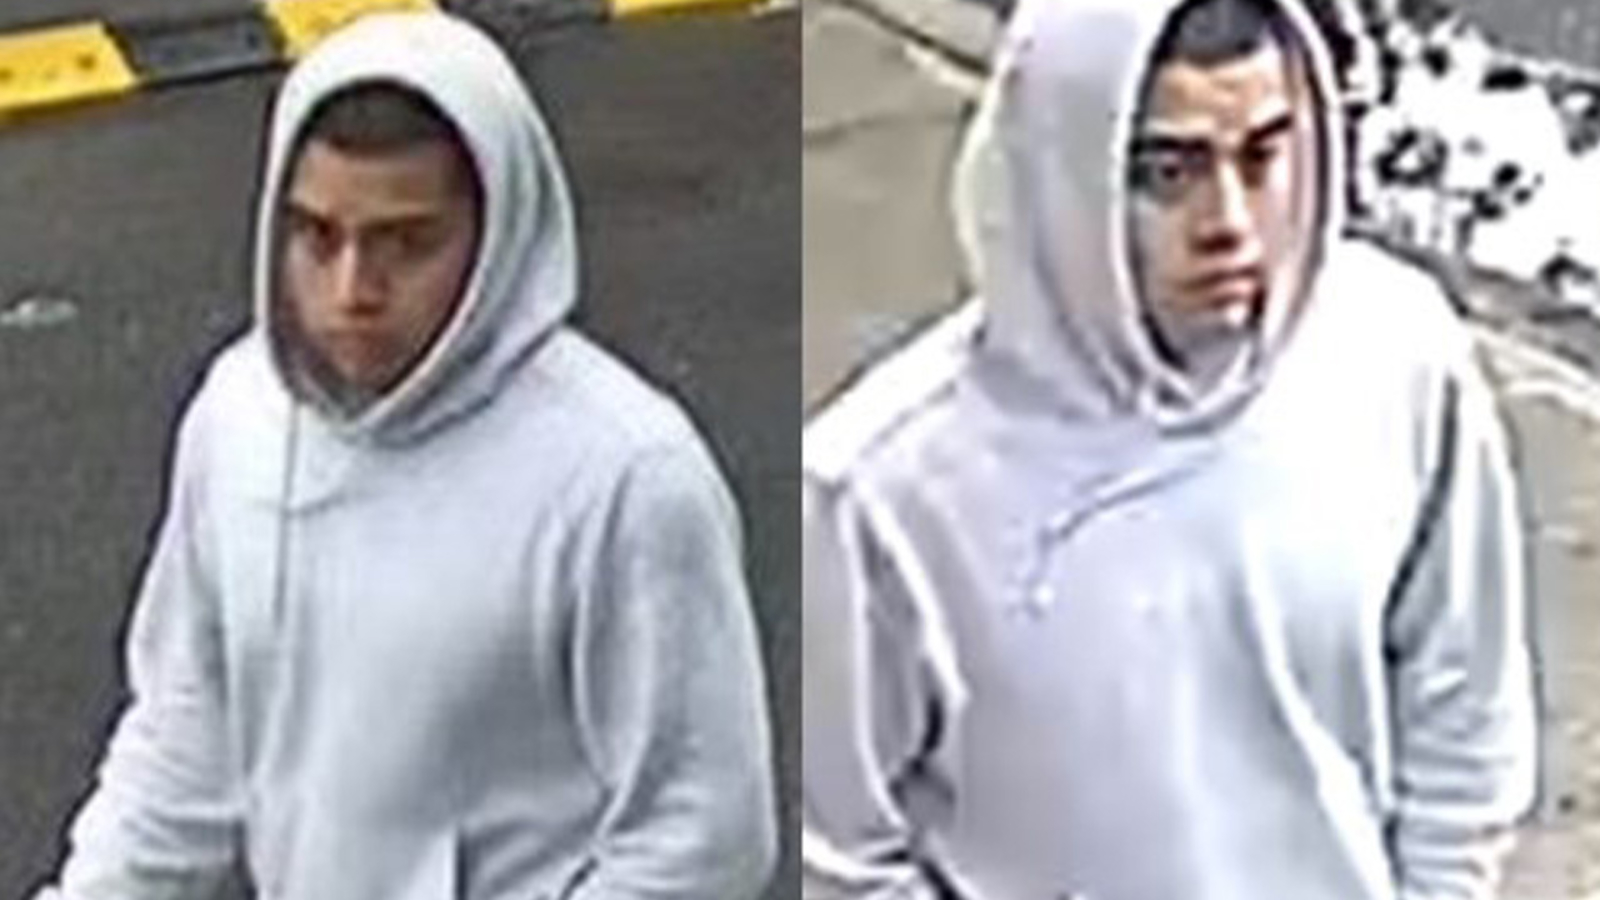 Brooklyn sex abuse: NYPD have released images of a suspect wanted in connection to an assault on a 9-year-old girl [Video]